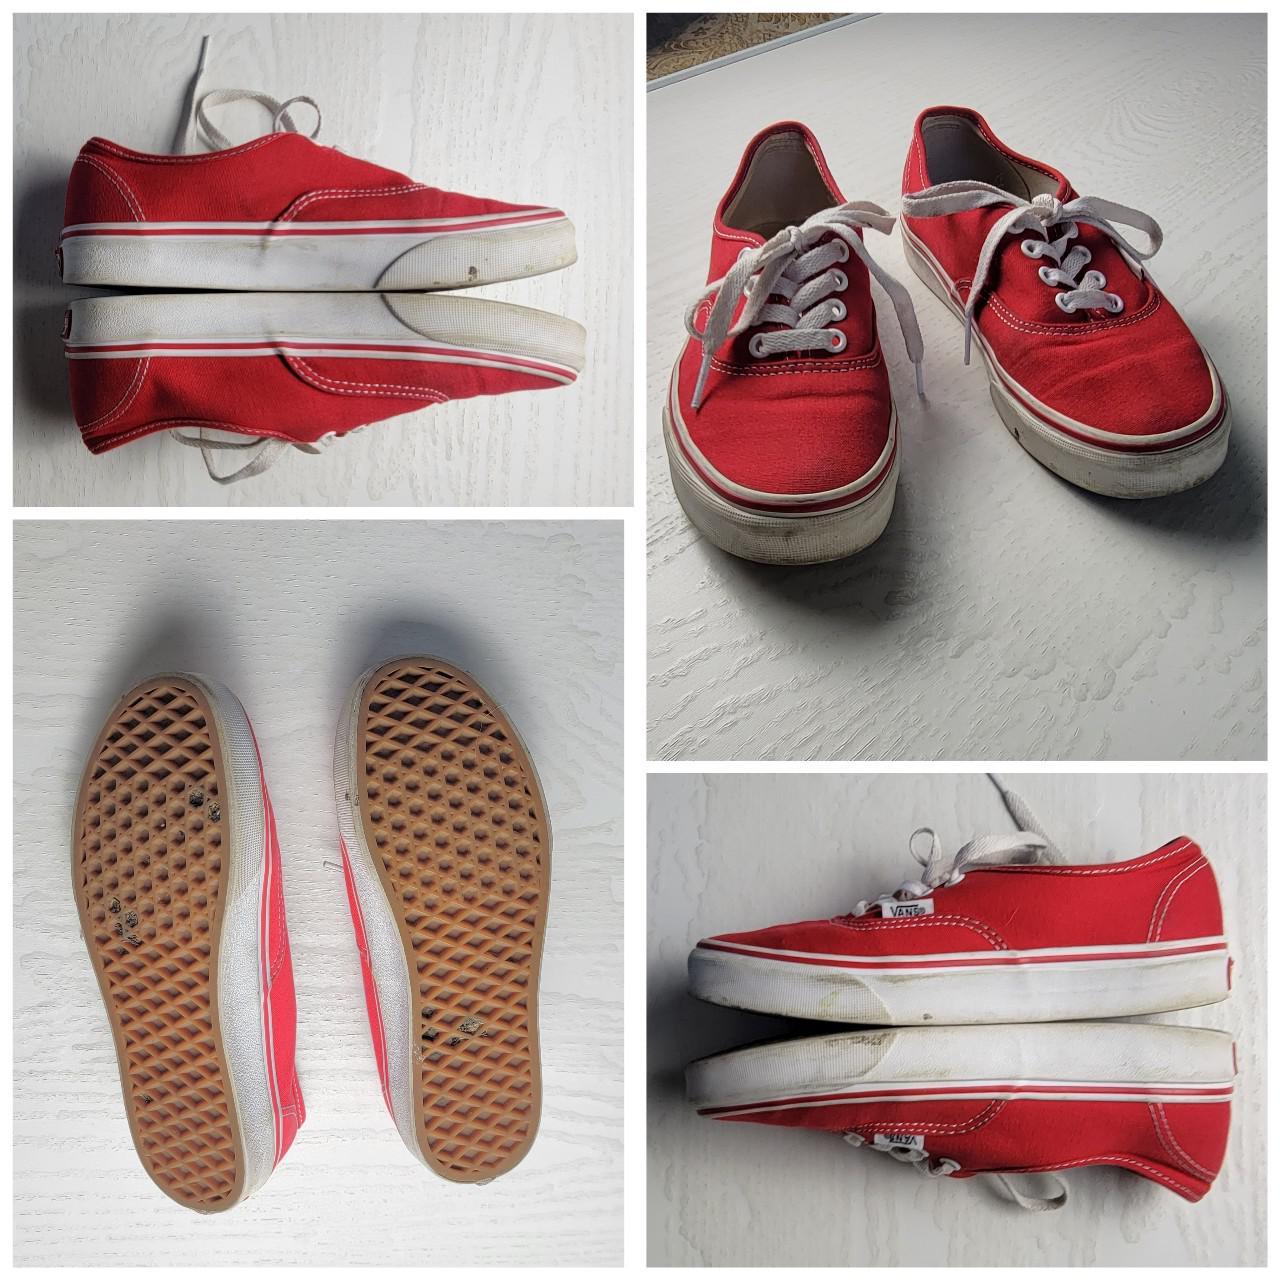 Vans Women's White and Red Trainers (4)